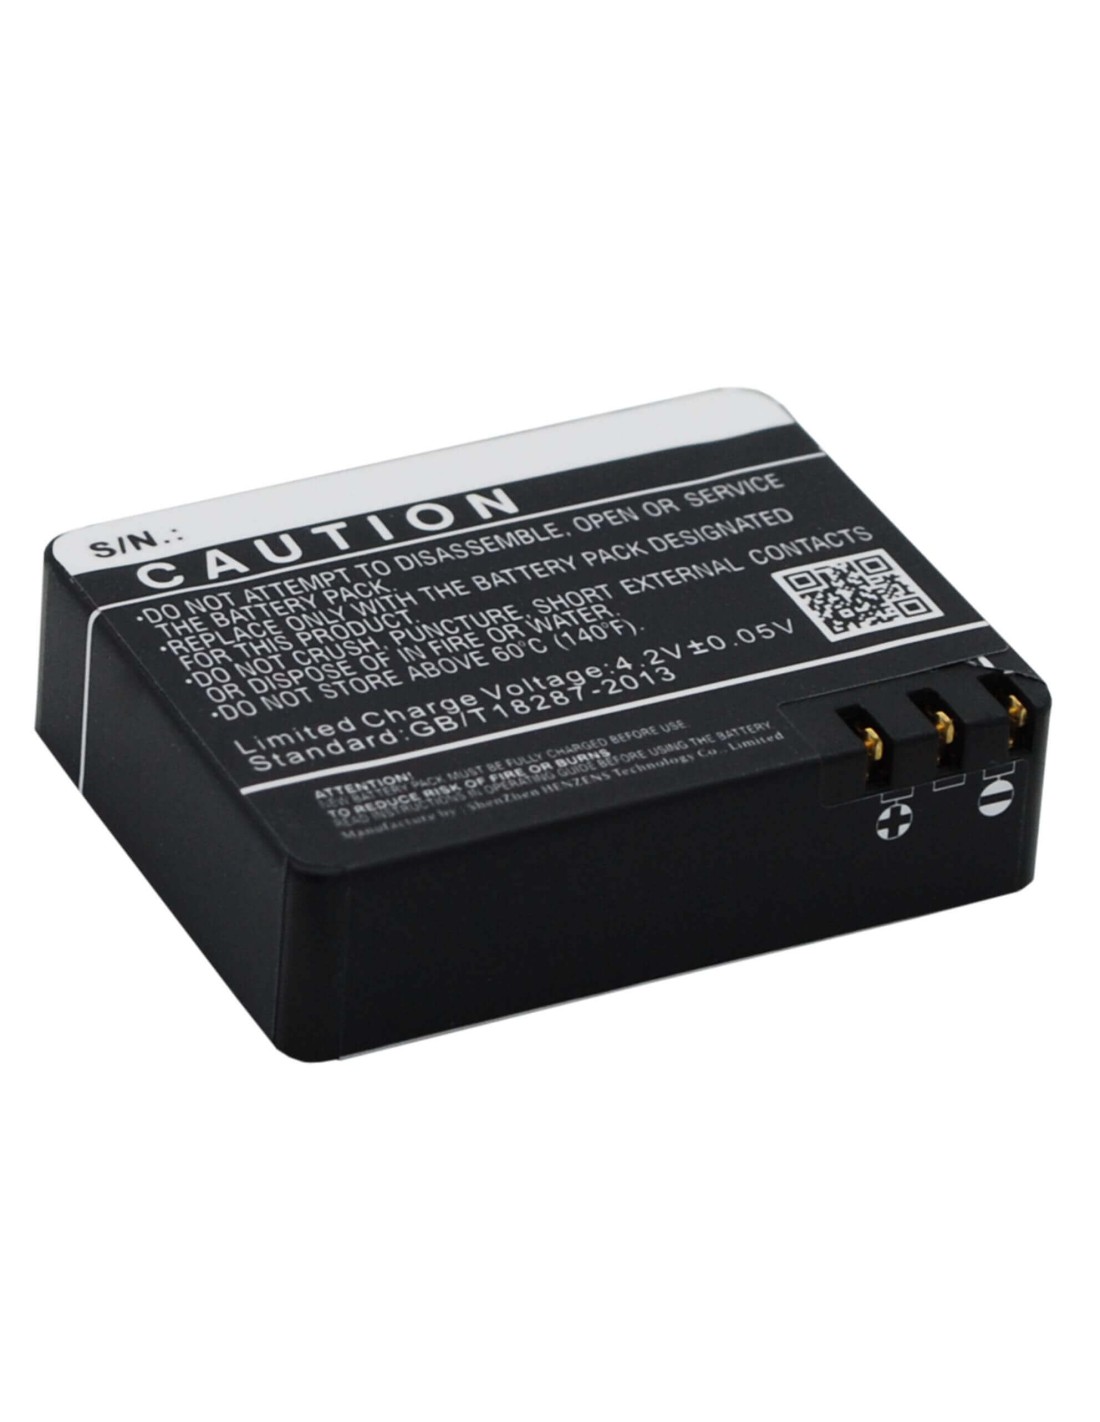 Battery for Evolveo W7, W8 3.7V, 900mAh - 3.33Wh